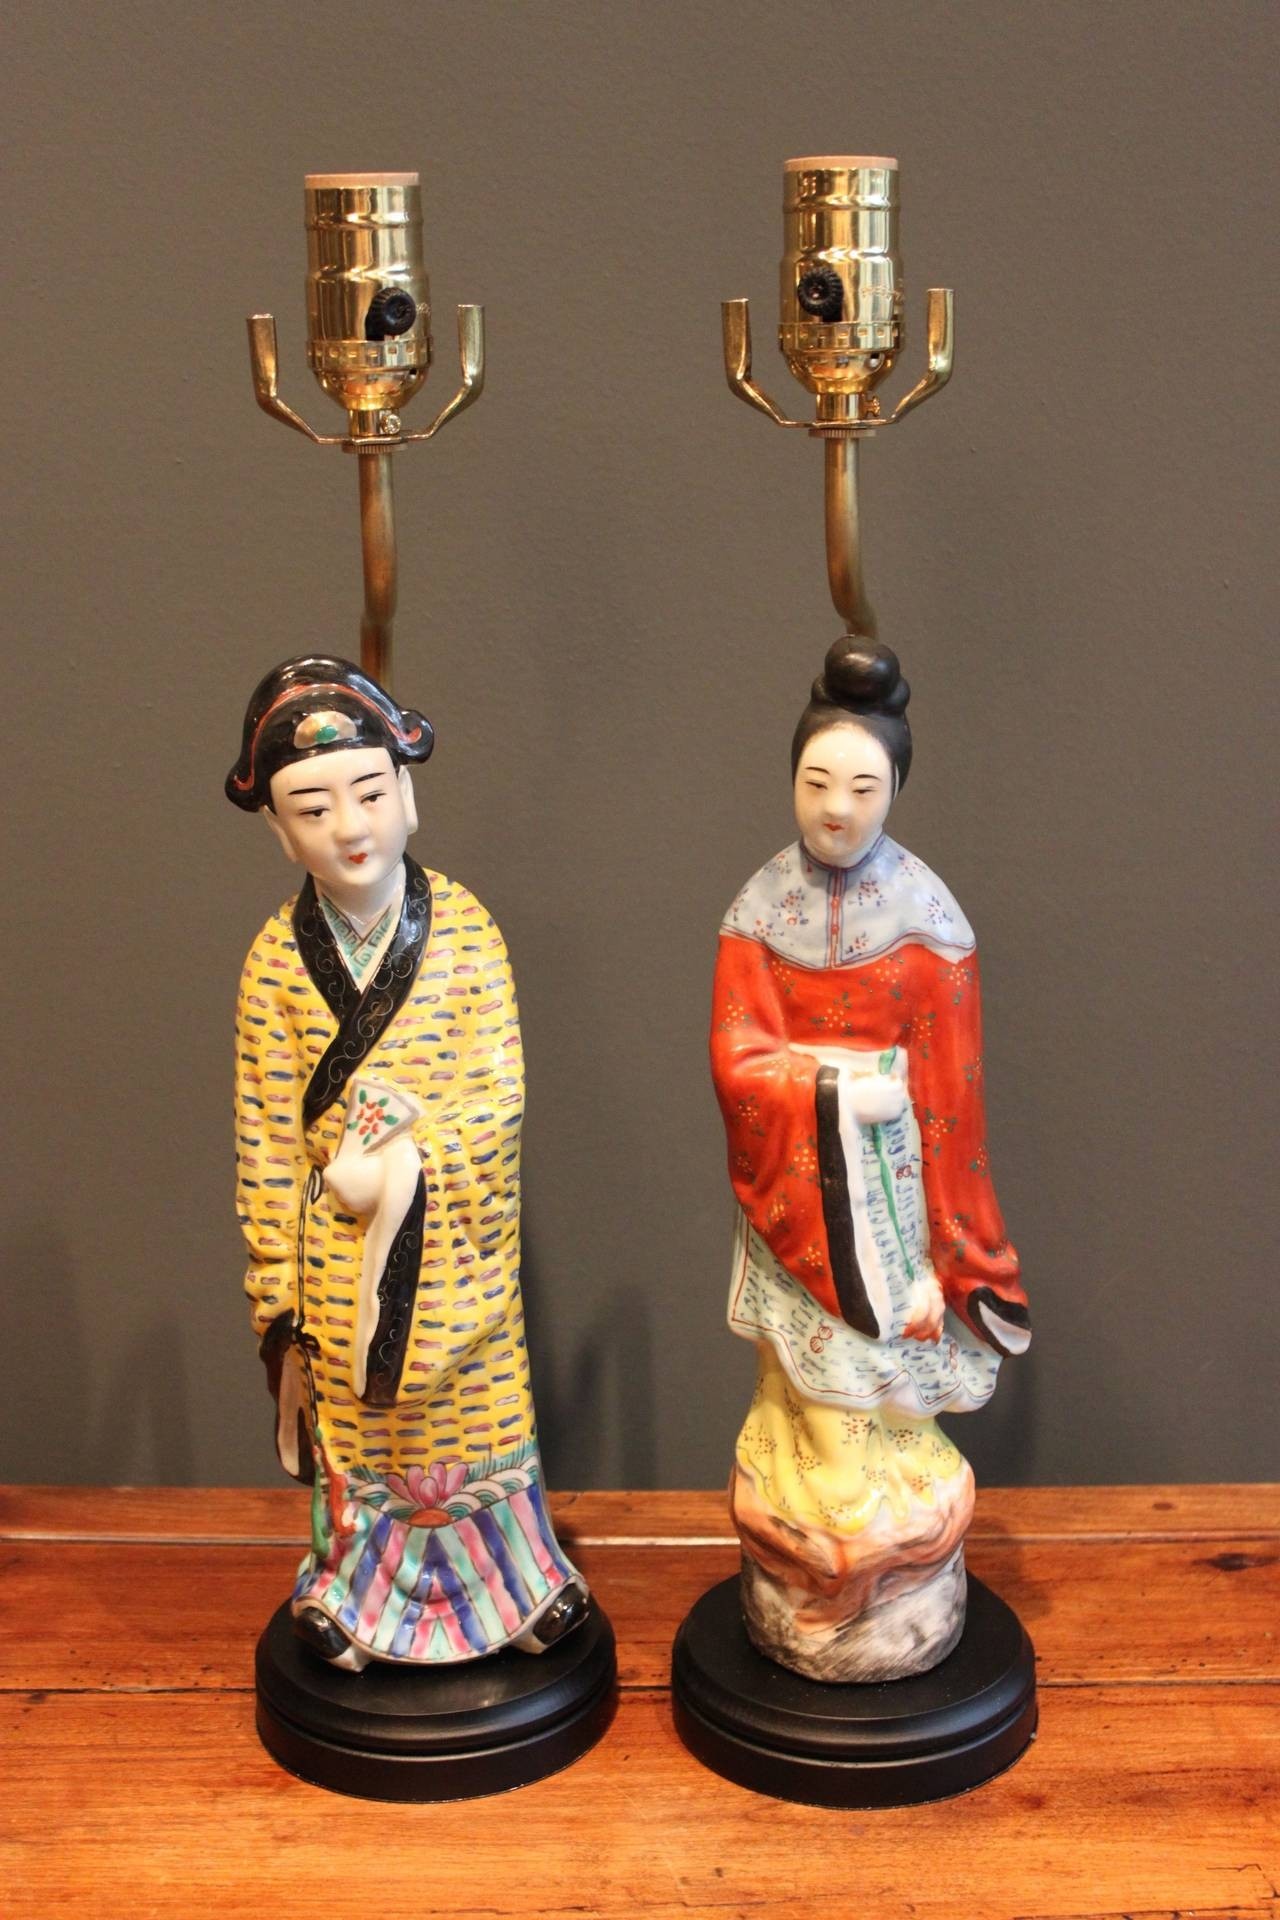 Pair of porcelain lamps of male and female chinese figures